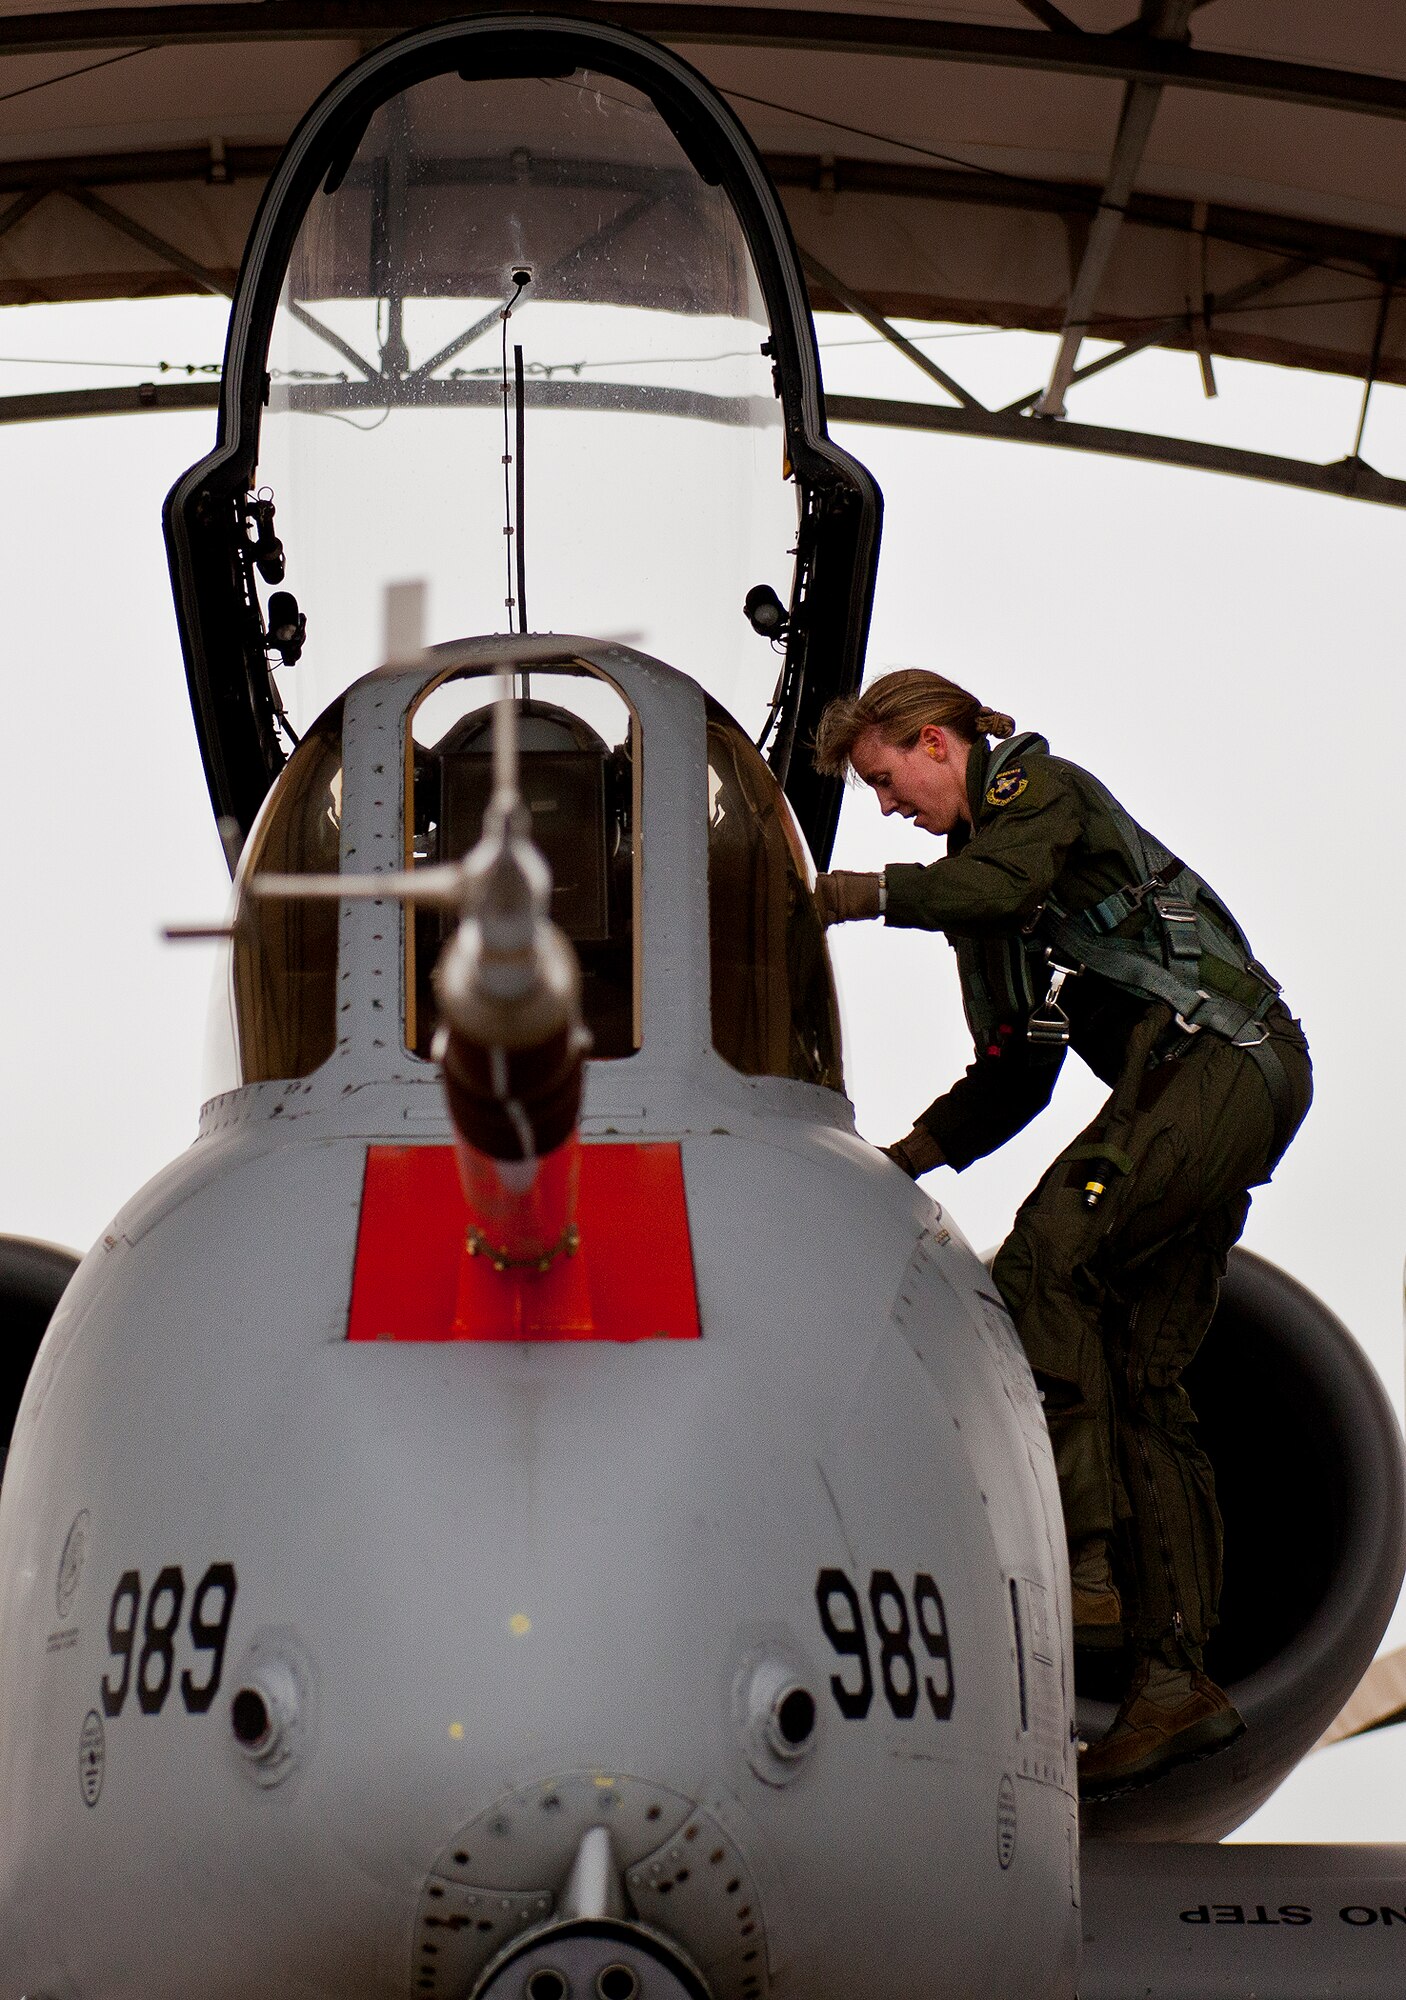 Maj. Olivia Elliott, of the 40th Flight Test Squadron, climbs into her A-10 Thunderbolt II prior to a test mission Jan. 10 at Eglin Air Force Base, Fla.  Her mission was to wrap up flight testing of the new Net-T software upgrade on the LITENING II advanced targeting pod.  The new upgrade allows the pod to provide ground forces beyond-line-of-sight command and control capabilities as long as the aircraft is within range.  This is the first-ever test of this new capability.   (U.S. Air Force photo/Samuel King Jr.)